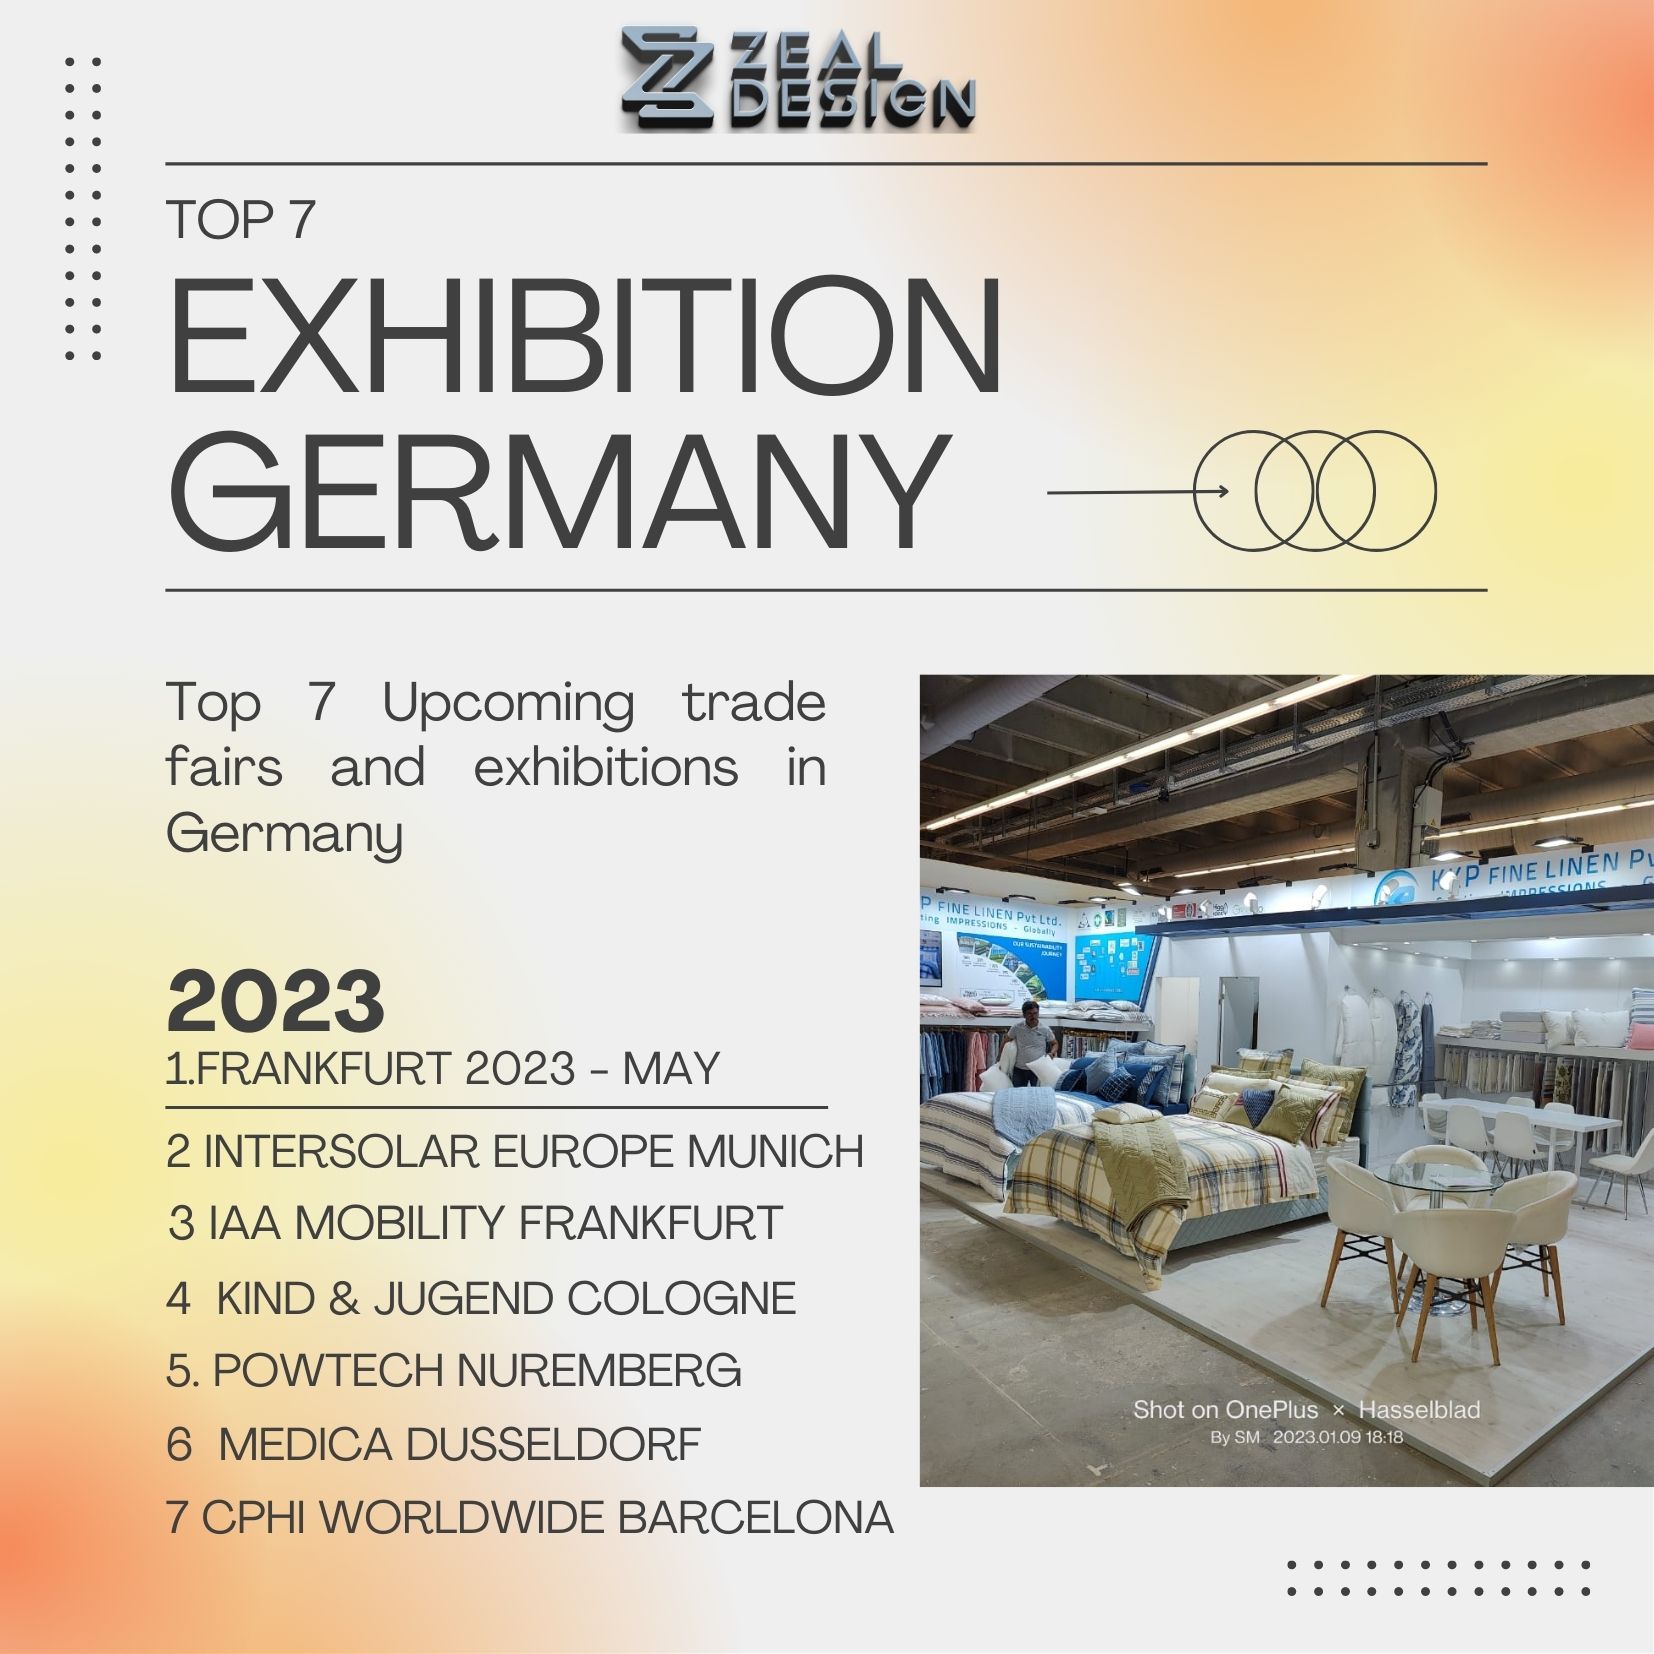 Top 7 exhibitions in Germany - 2023